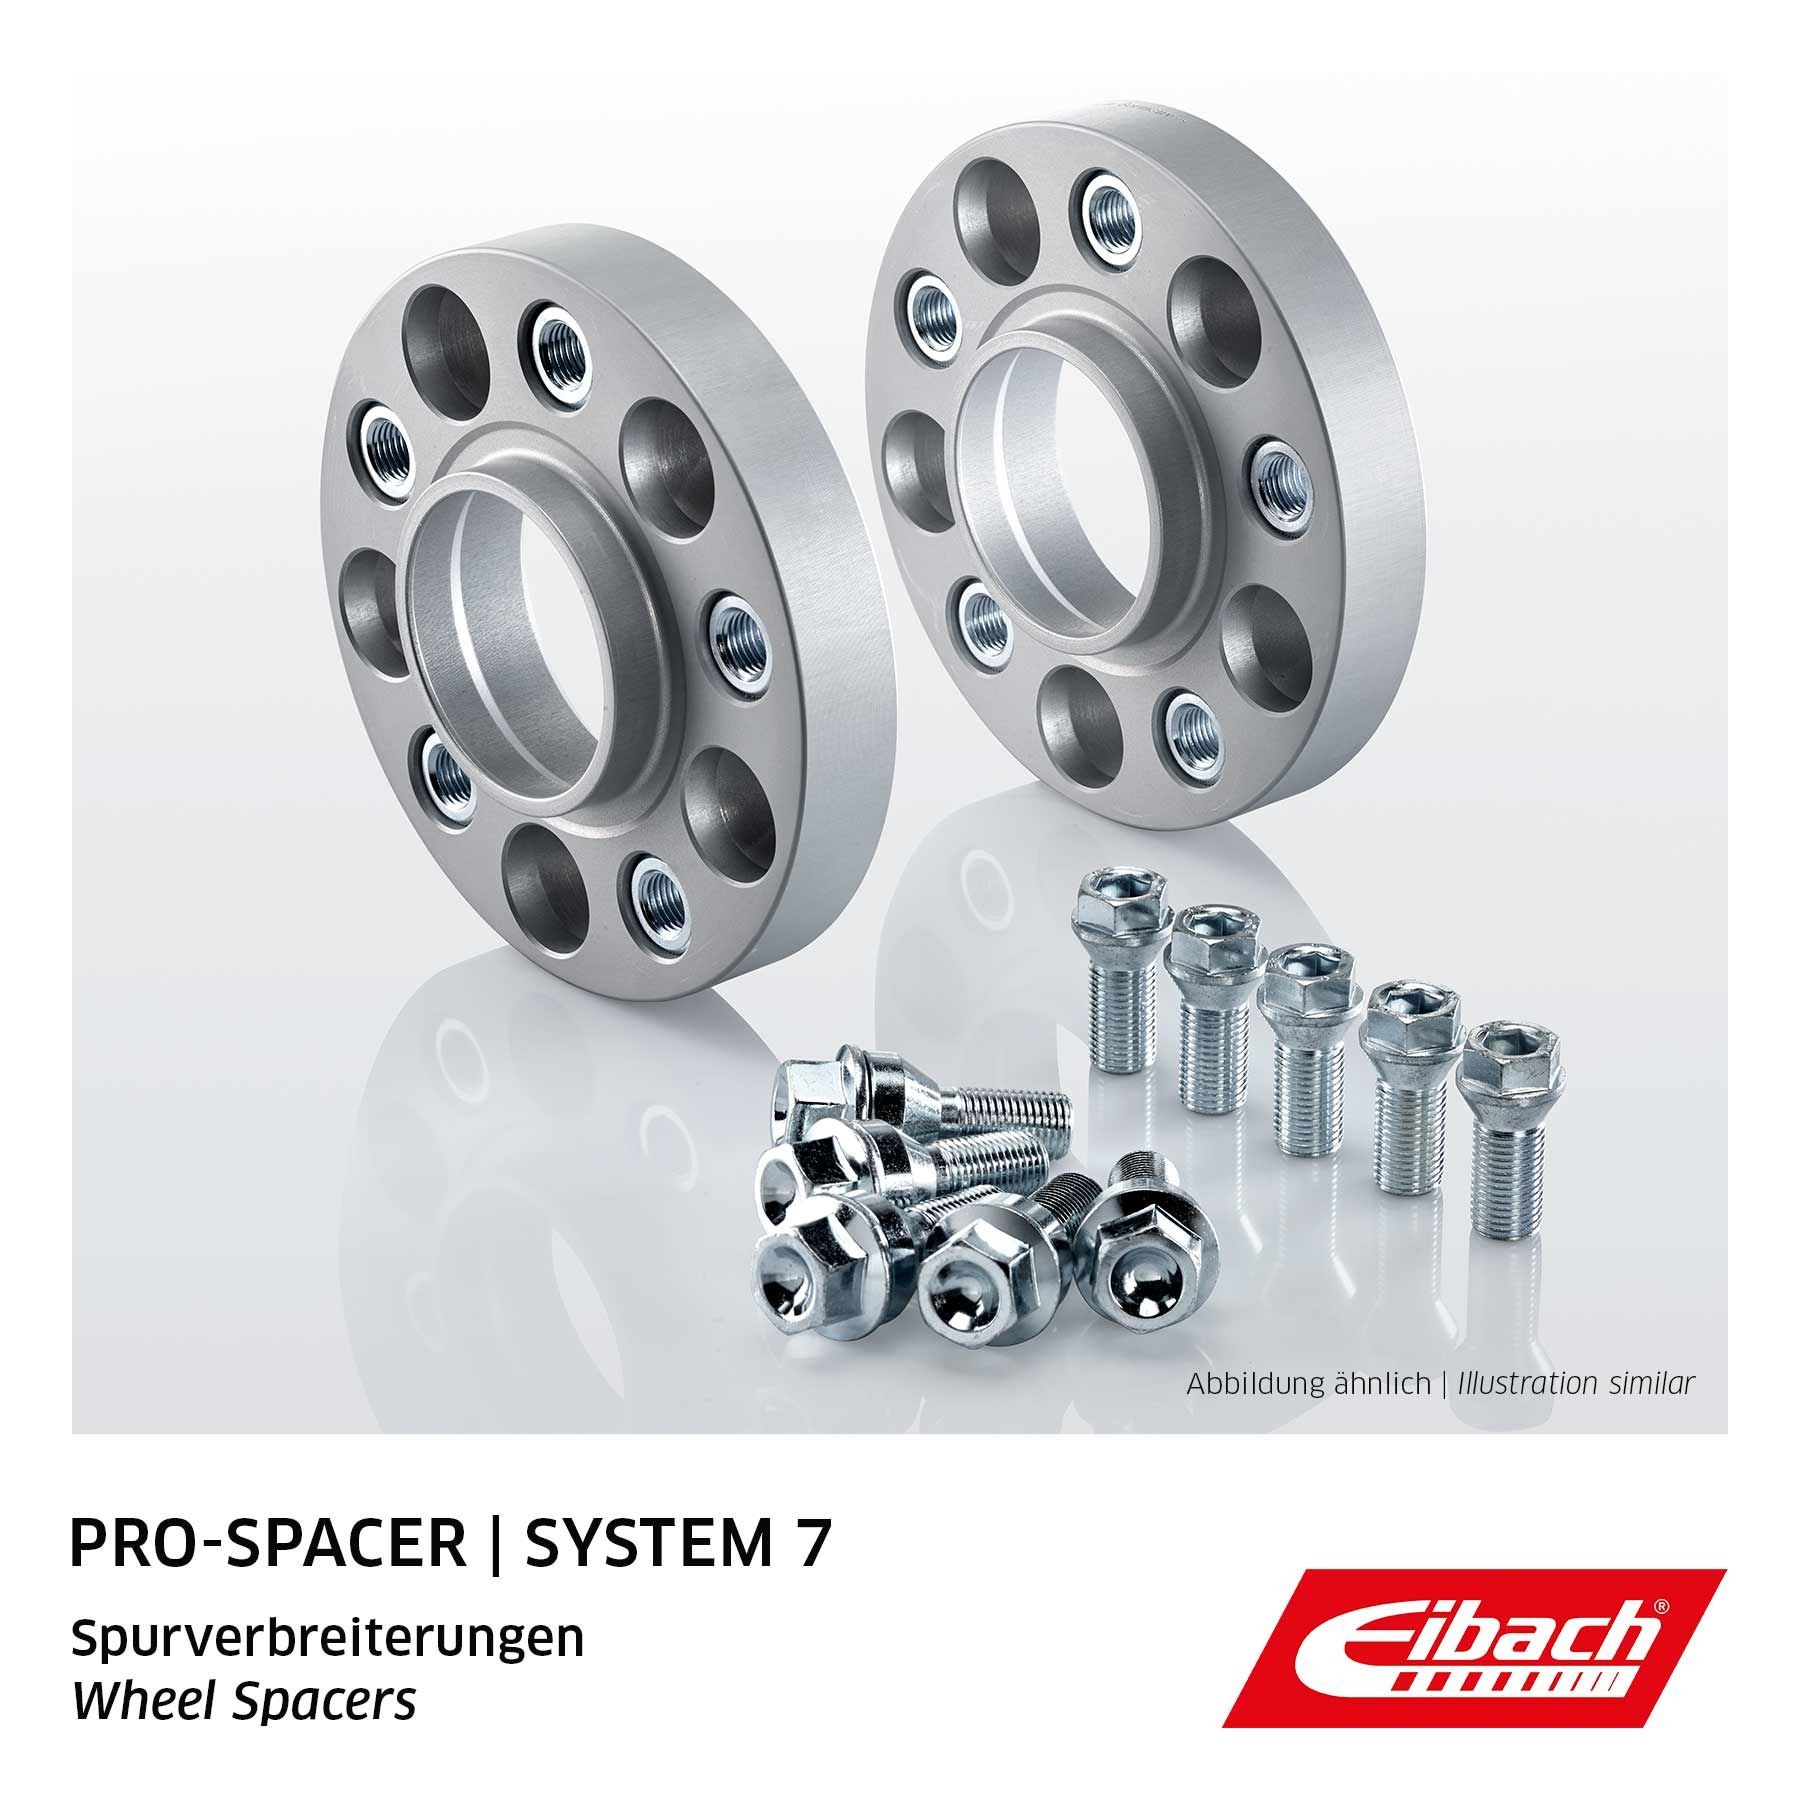 Opel Wheel spacer EIBACH S90-7-30-009 at a good price